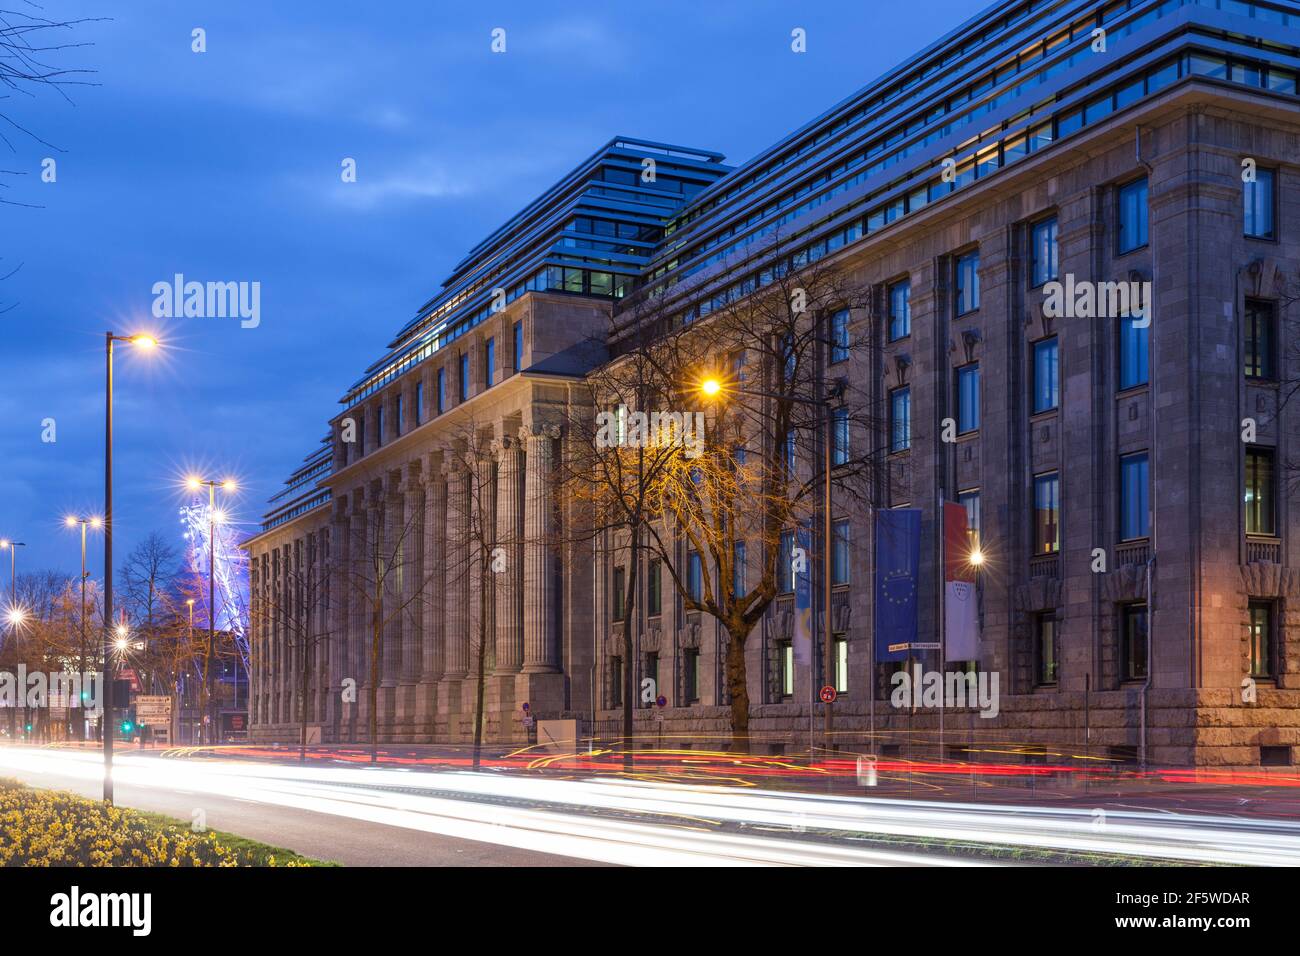 the office building 'Neue Direktion' on the street Konrad-Adenauer-Ufer, head office of the European Aviation Safety Agency (EASA), Cologne, Germany. Stock Photo